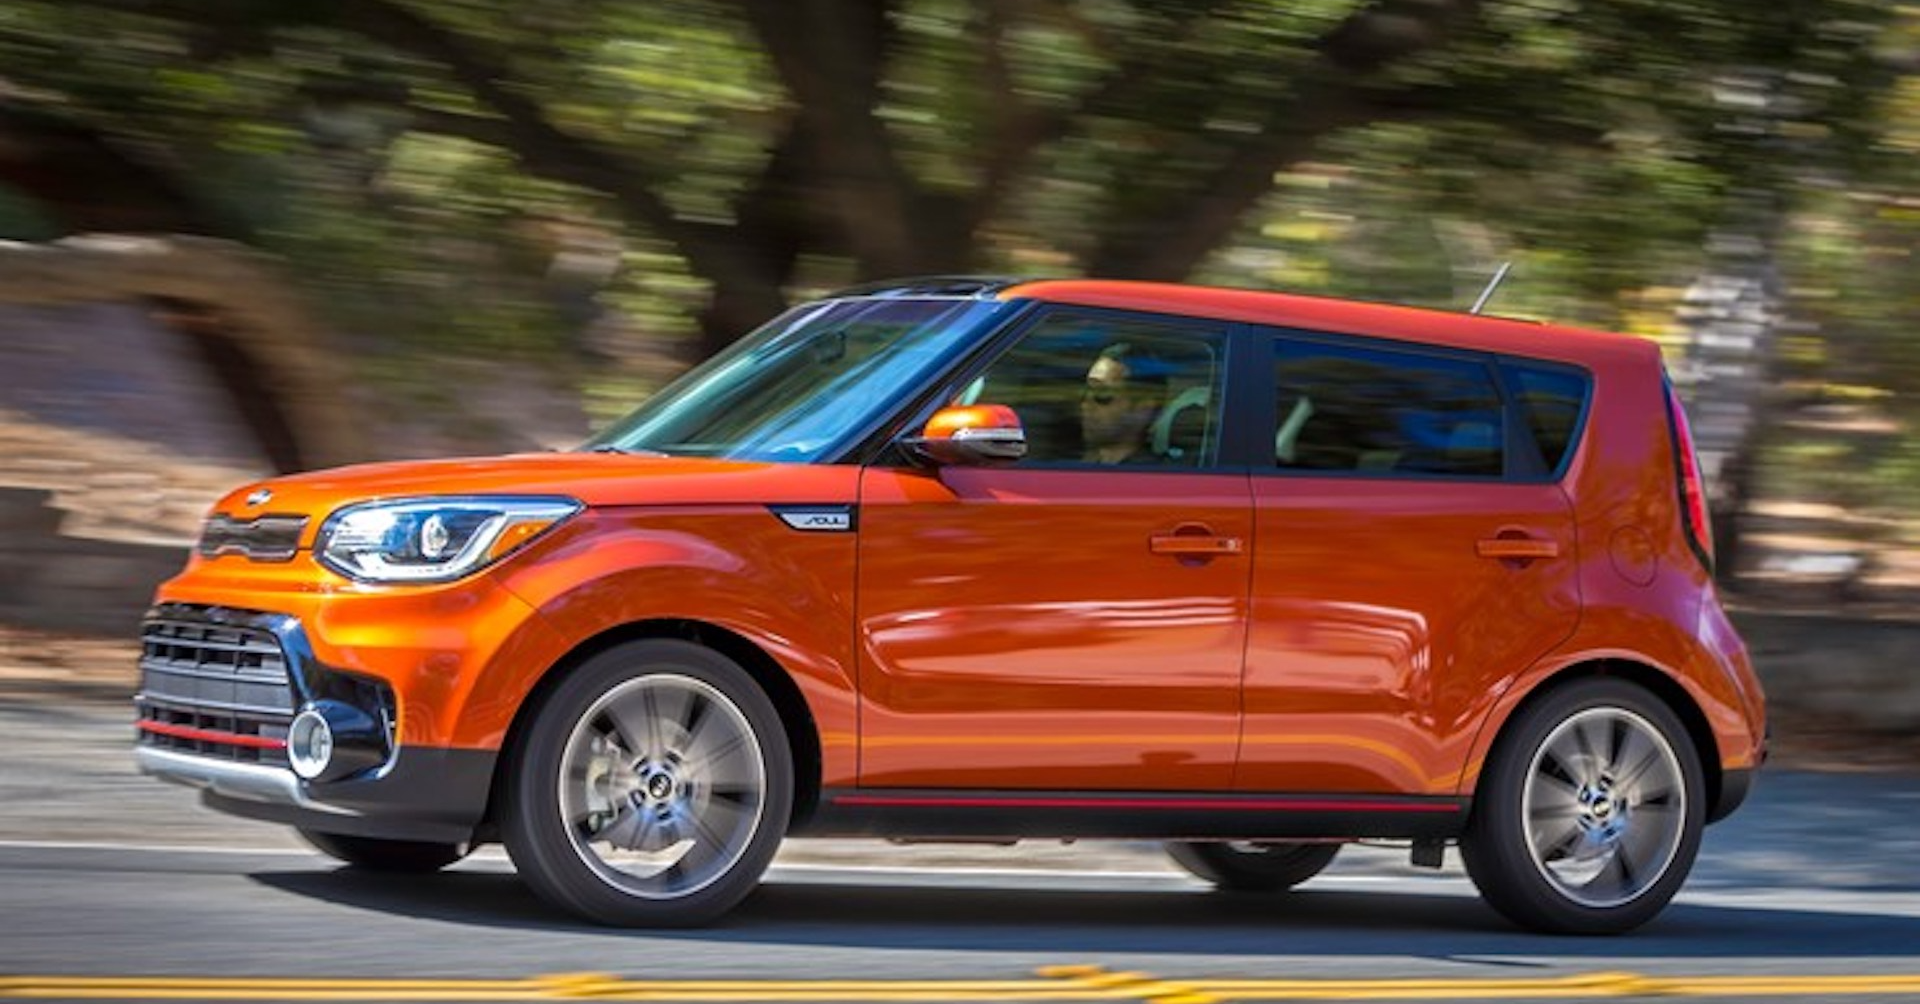 The Kia Soul Continues to Offer You a Funky Style